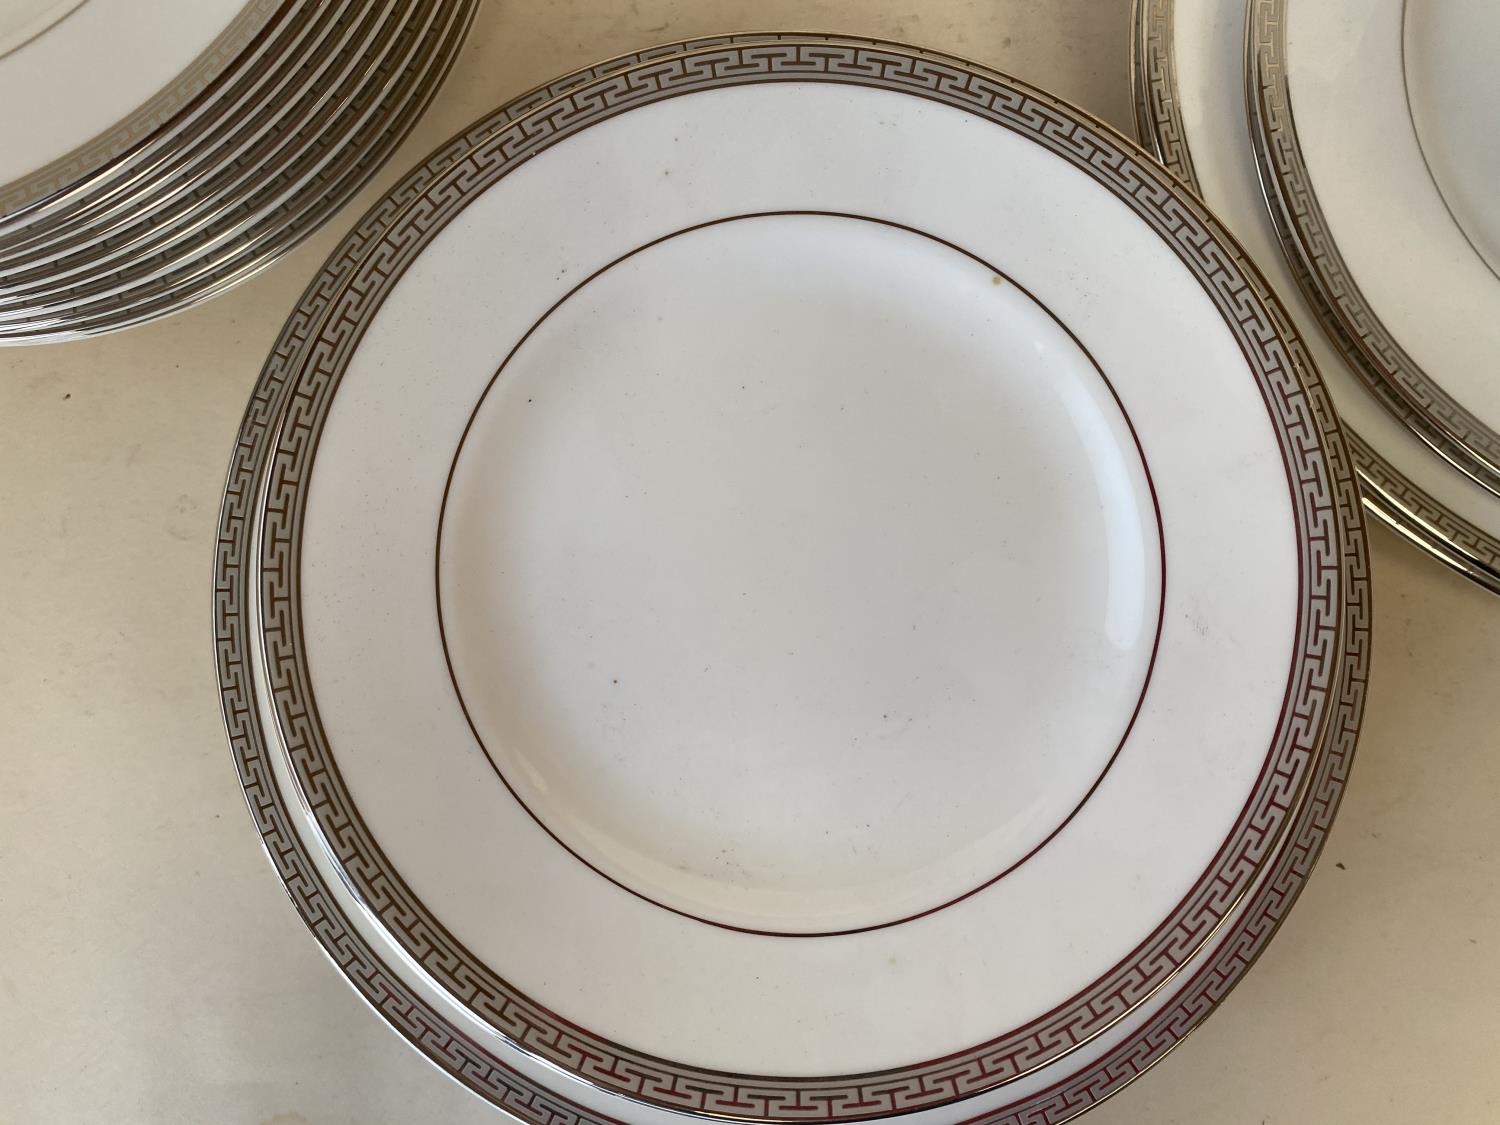 Royal Worcester Corinth Platinum modern dinner service, 10 place setting plus platters and dishes, - Image 2 of 6